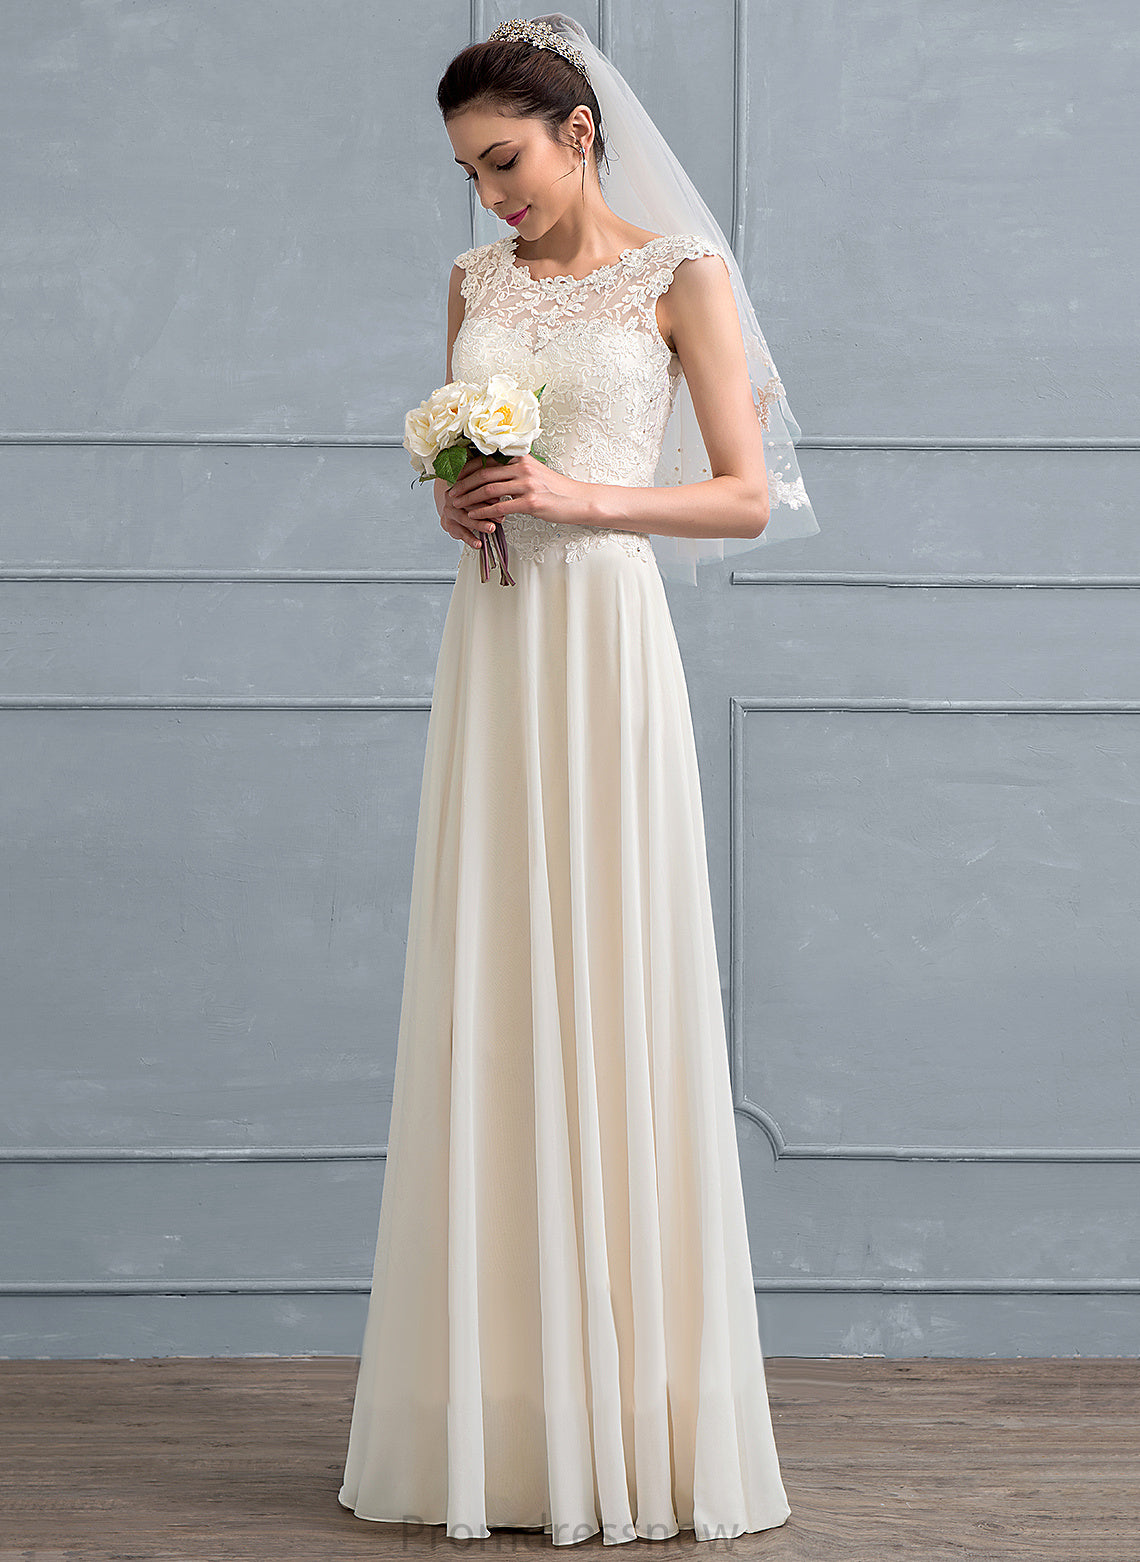 Scoop Wedding Floor-Length Dress Halle Wedding Dresses Beading A-Line Sequins With Chiffon Lace